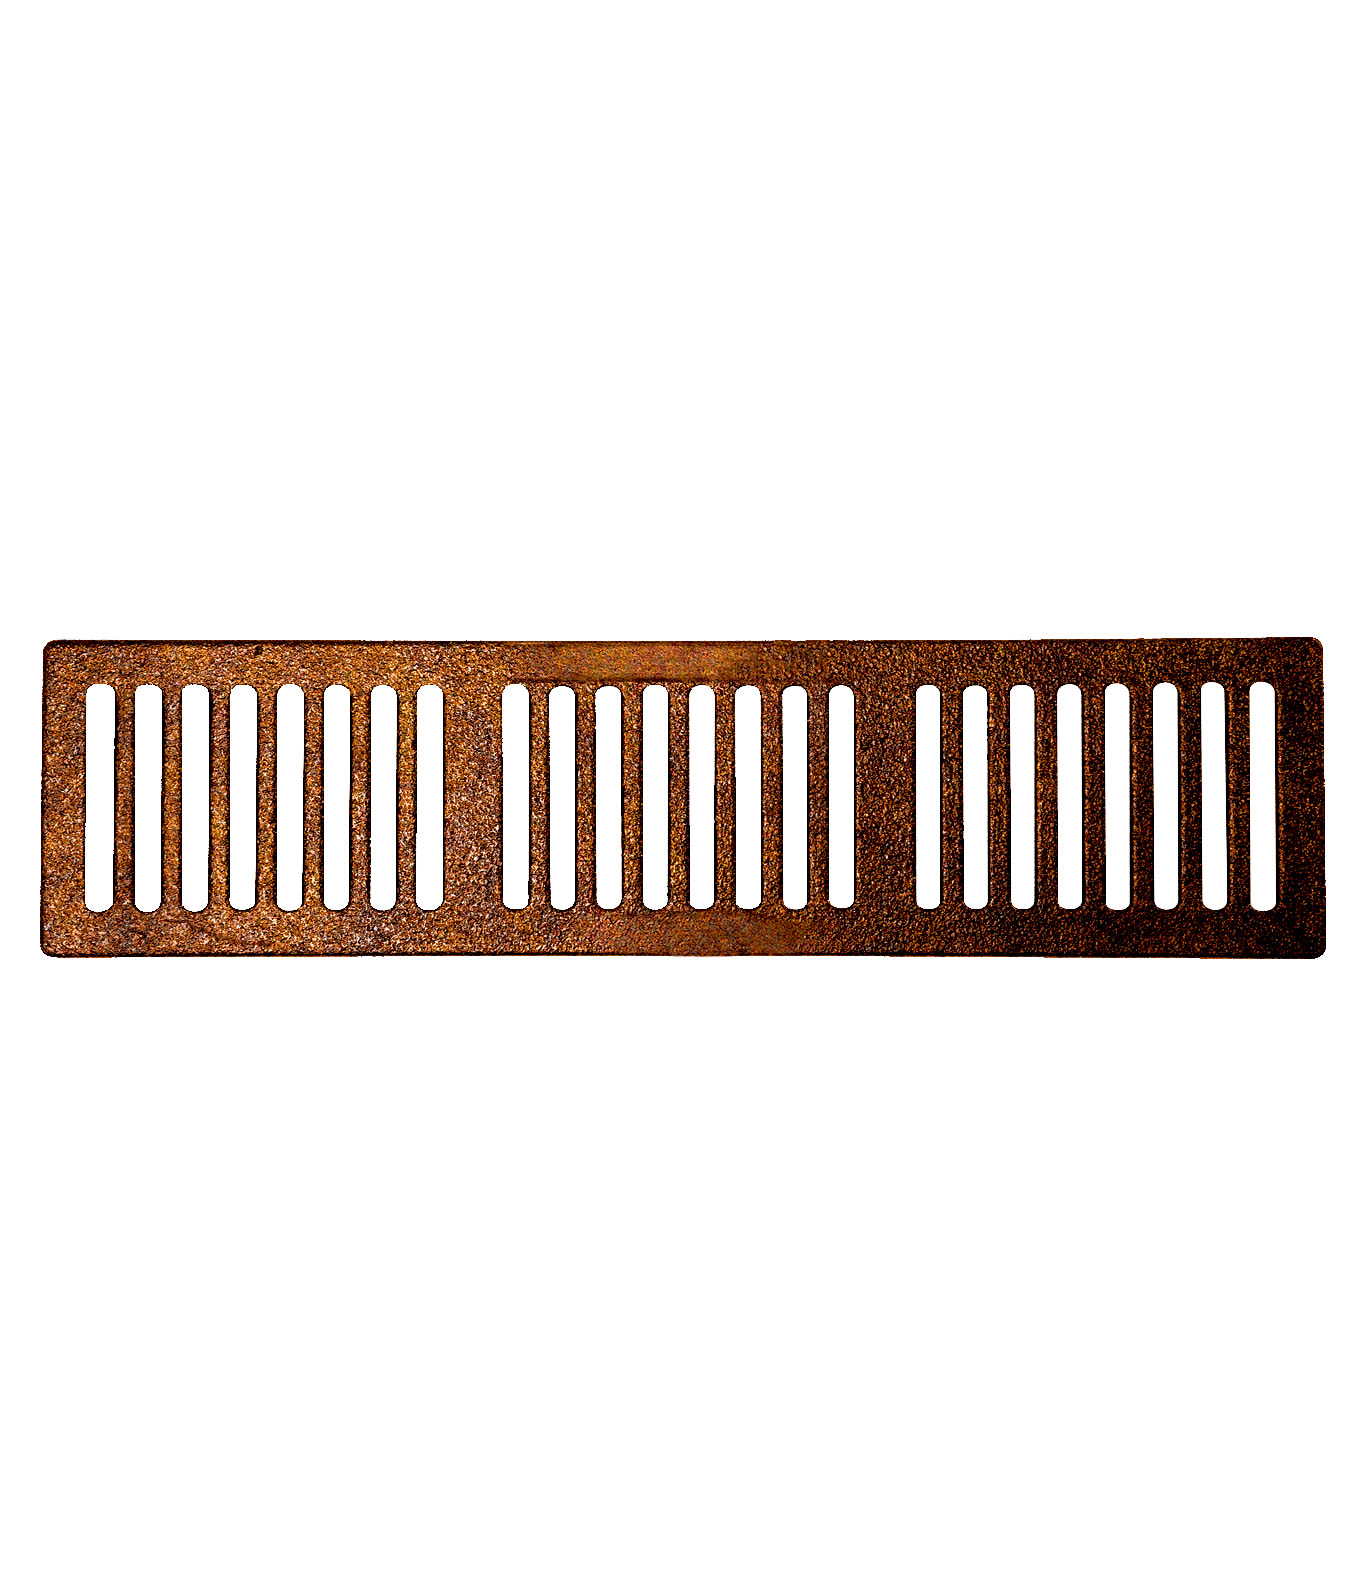 R-4989-P trench drain with 6-inch width